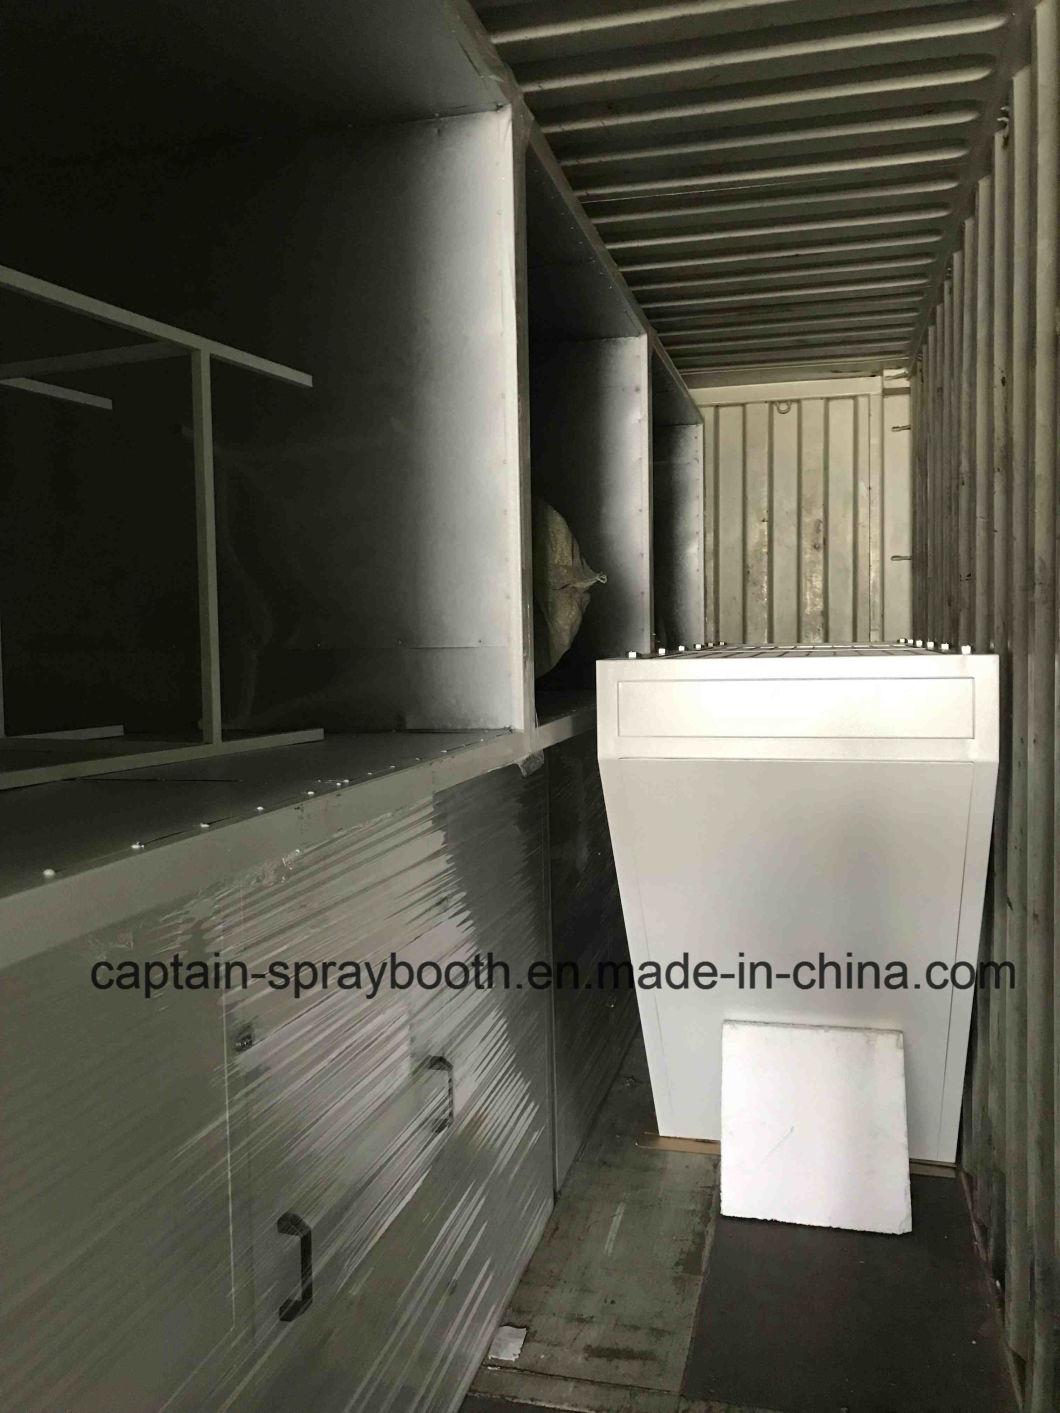 Truck/Large/Airplane Spray Paint Booth/Spray Booth/Paint Oven